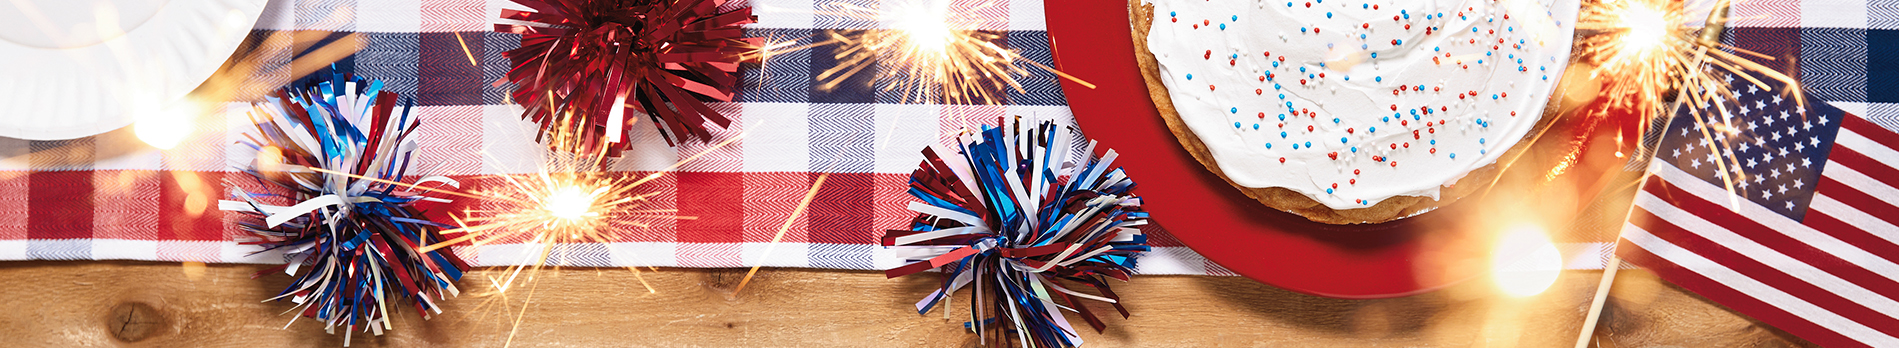 Fourth of July background with sparklers, cake with red, white and blue sprinkles, and checkered table runner